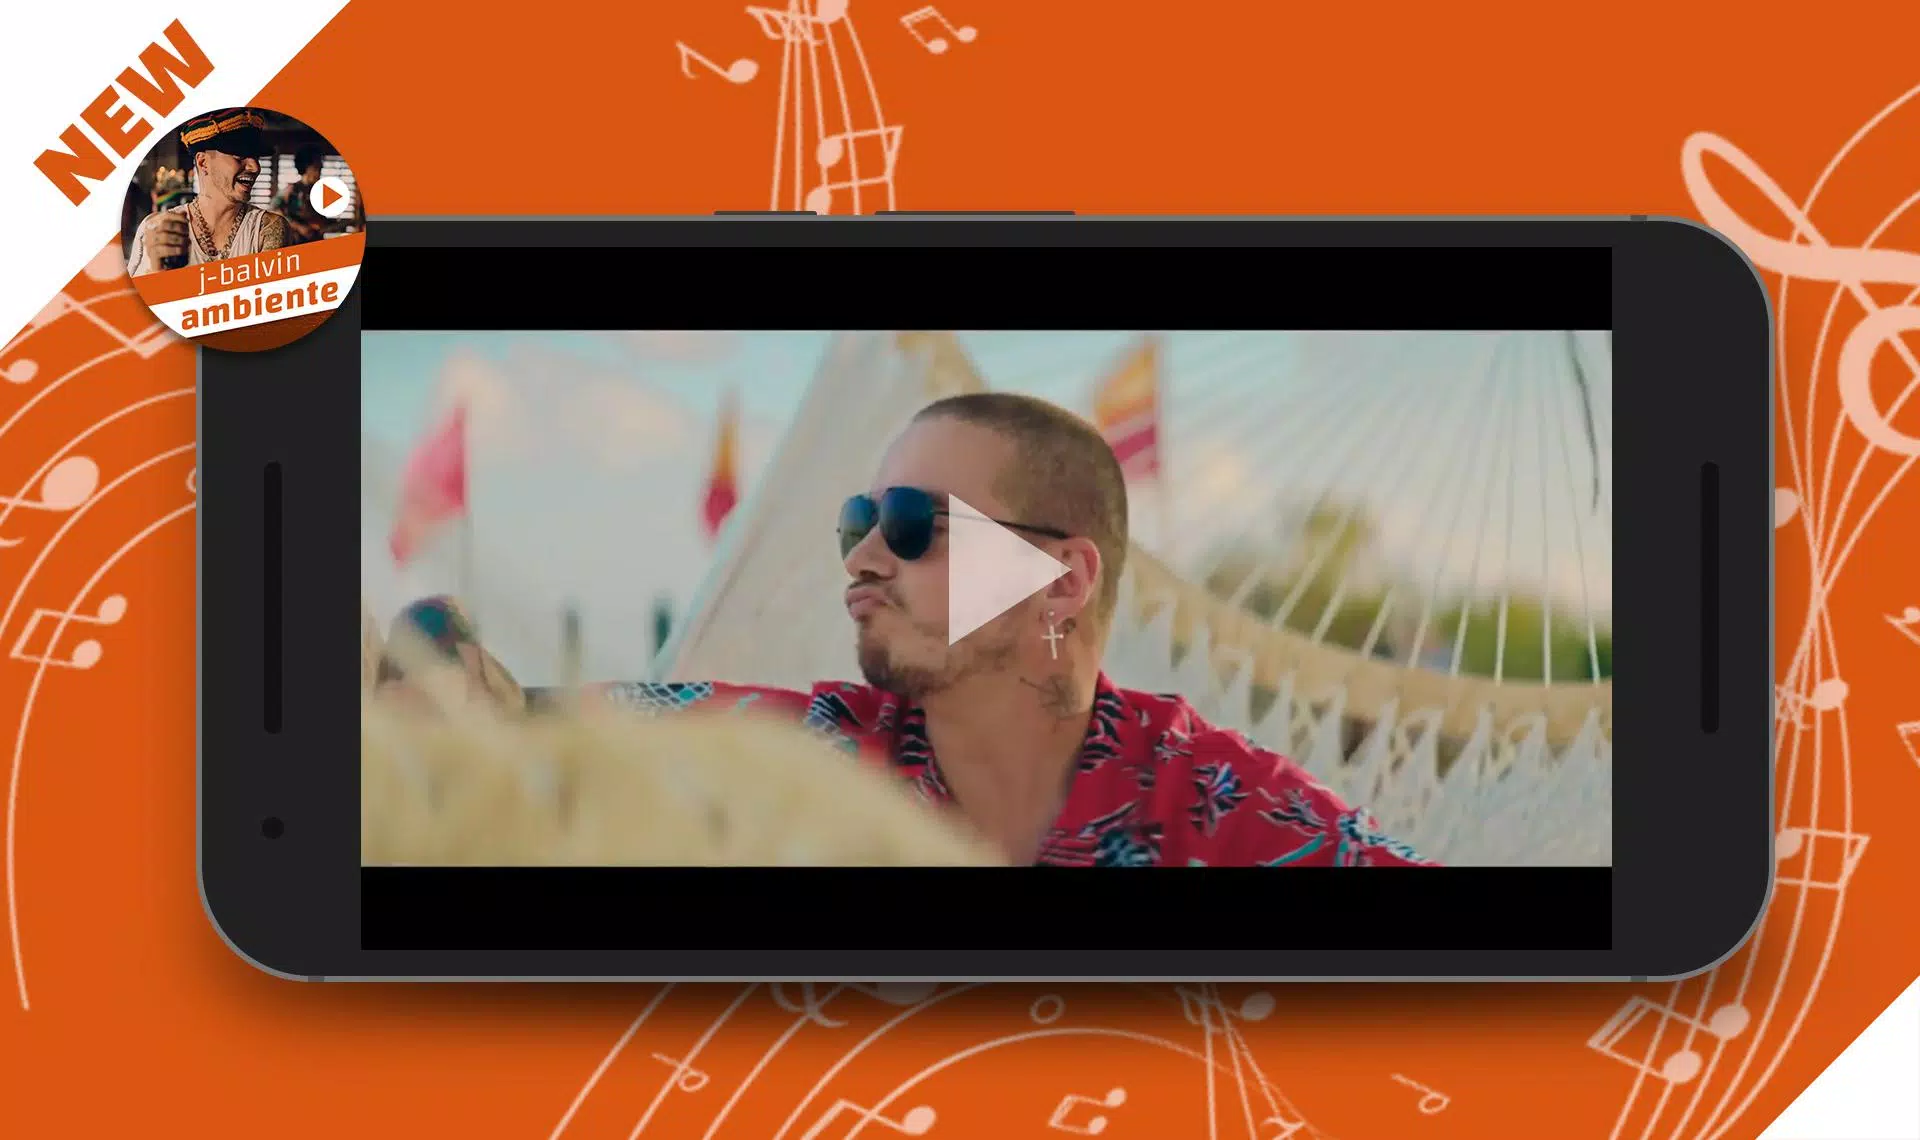 Ambiente j-balvin APK for Android Download